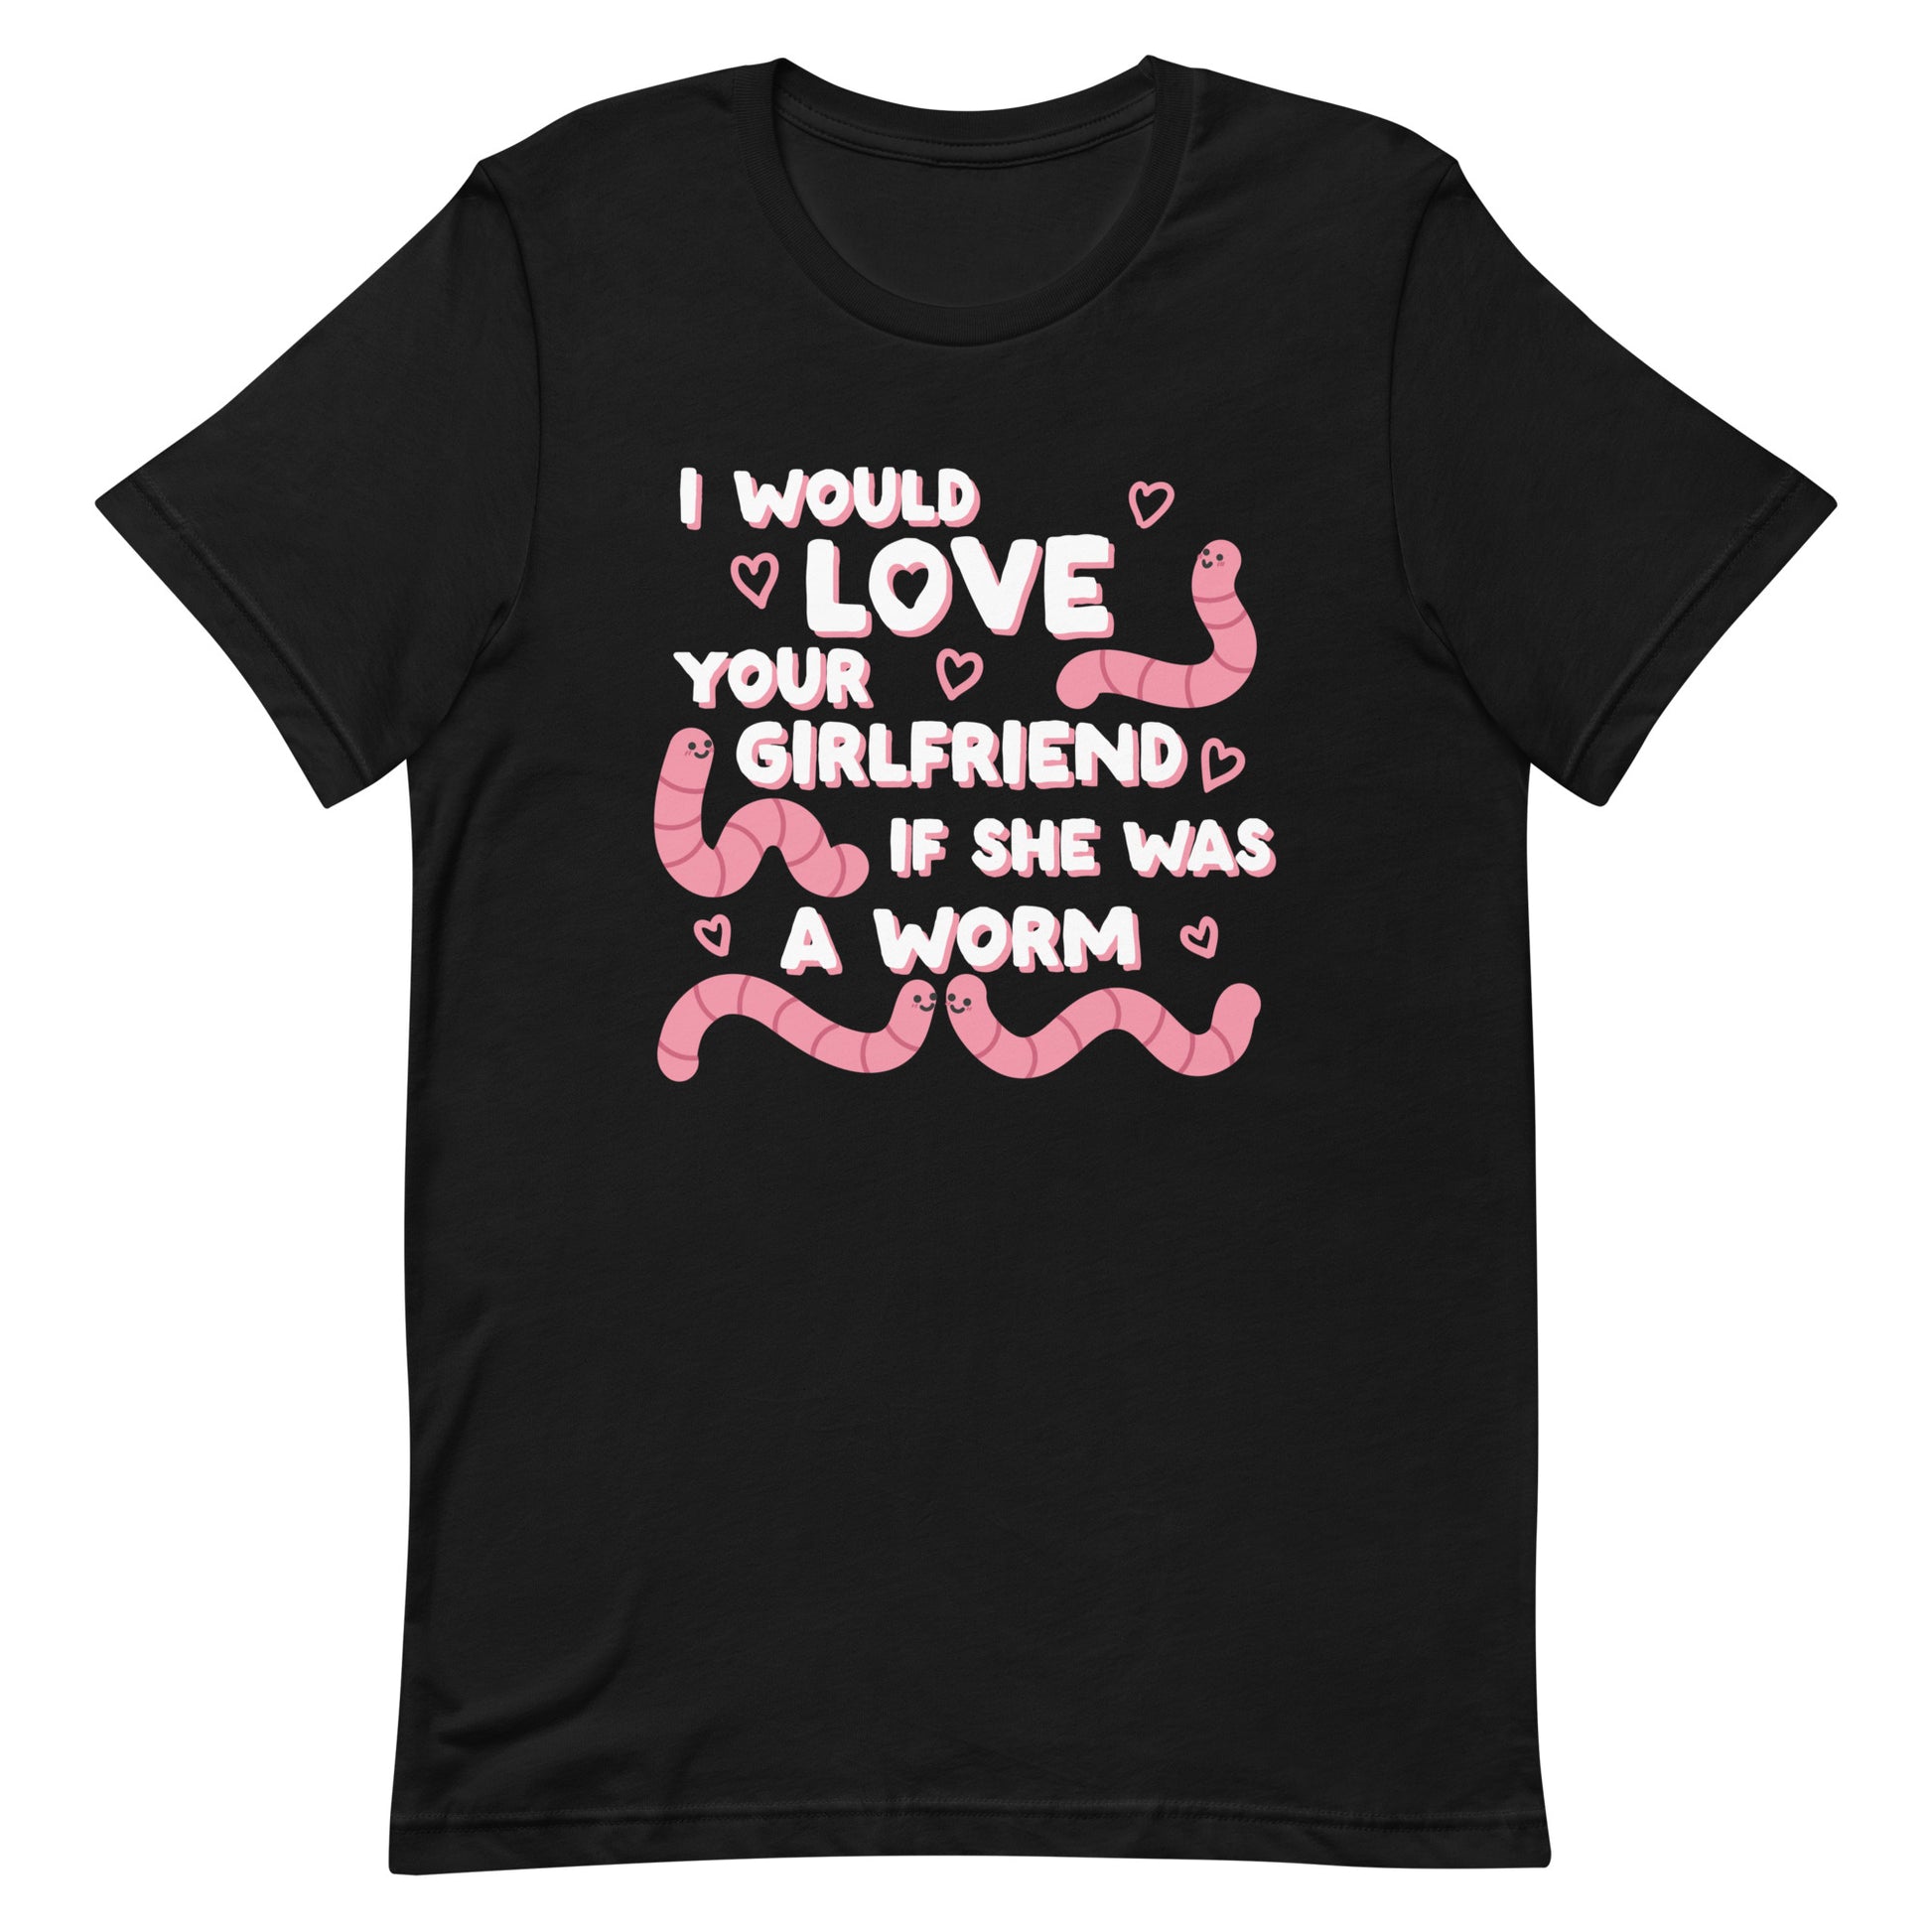 A black crewneck t-shirt featuring text that reads "I would love your girlfriend if she was a worm". Cute cartoon worms and hearts surround the text.